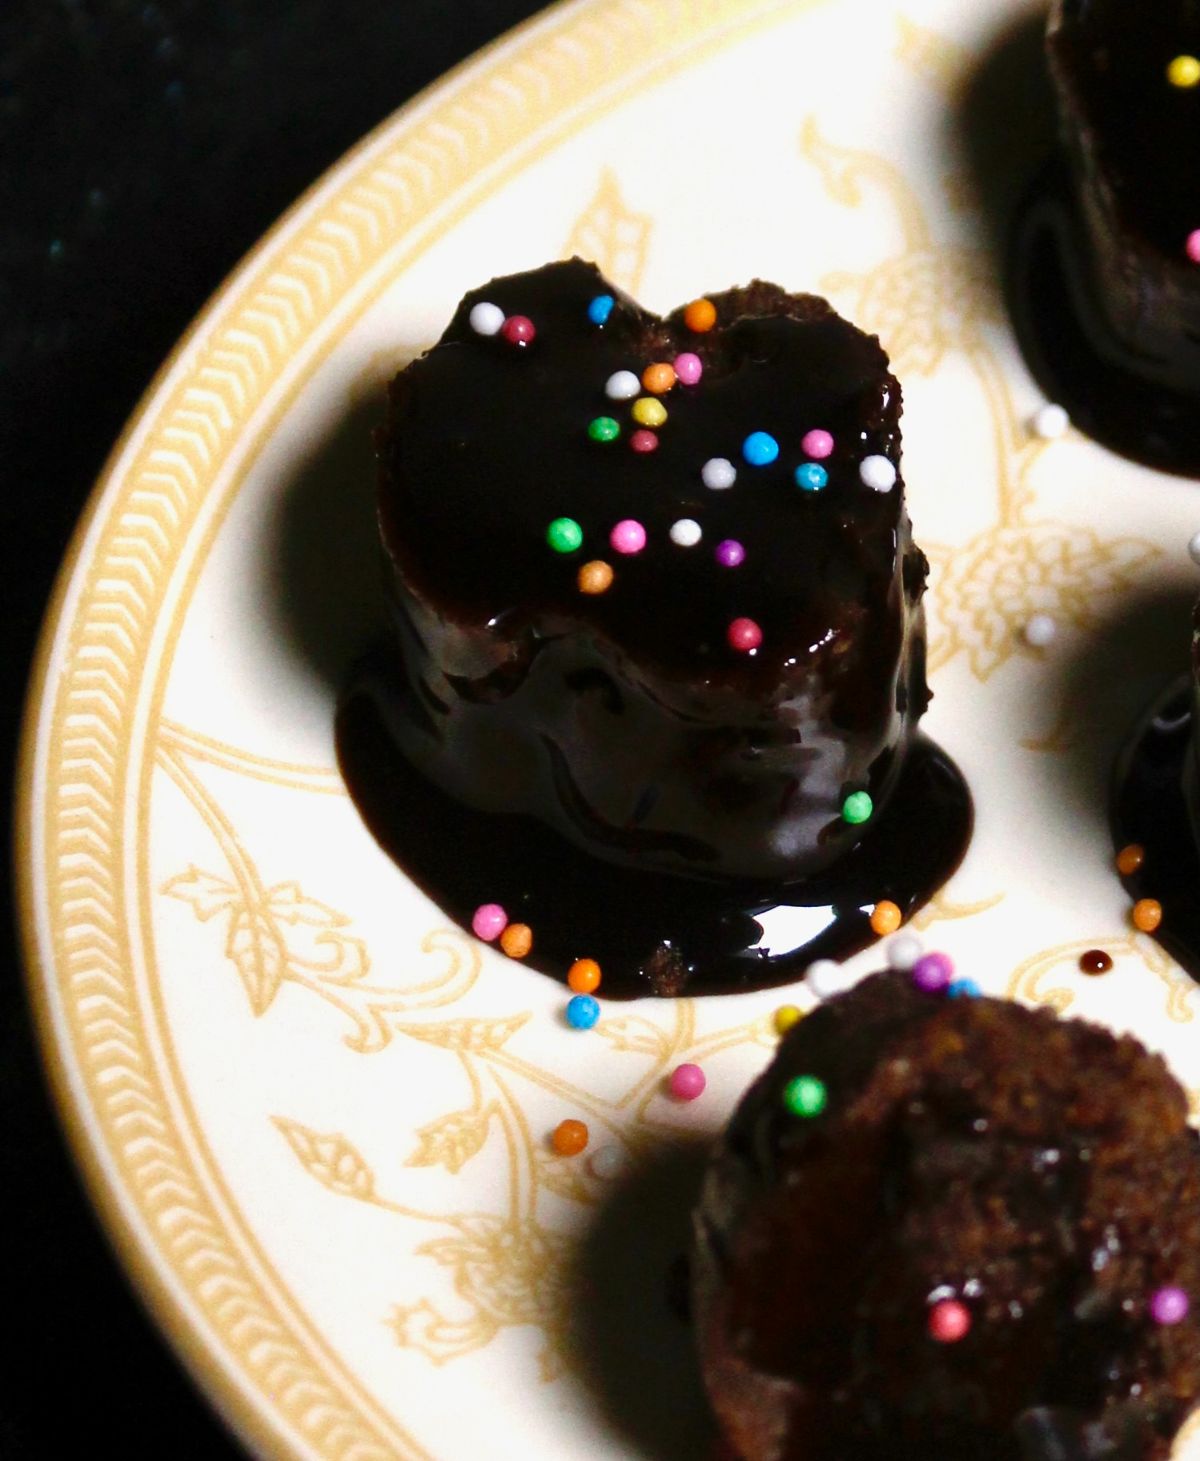 Delicious Chocolate Sauce Dipped Bites